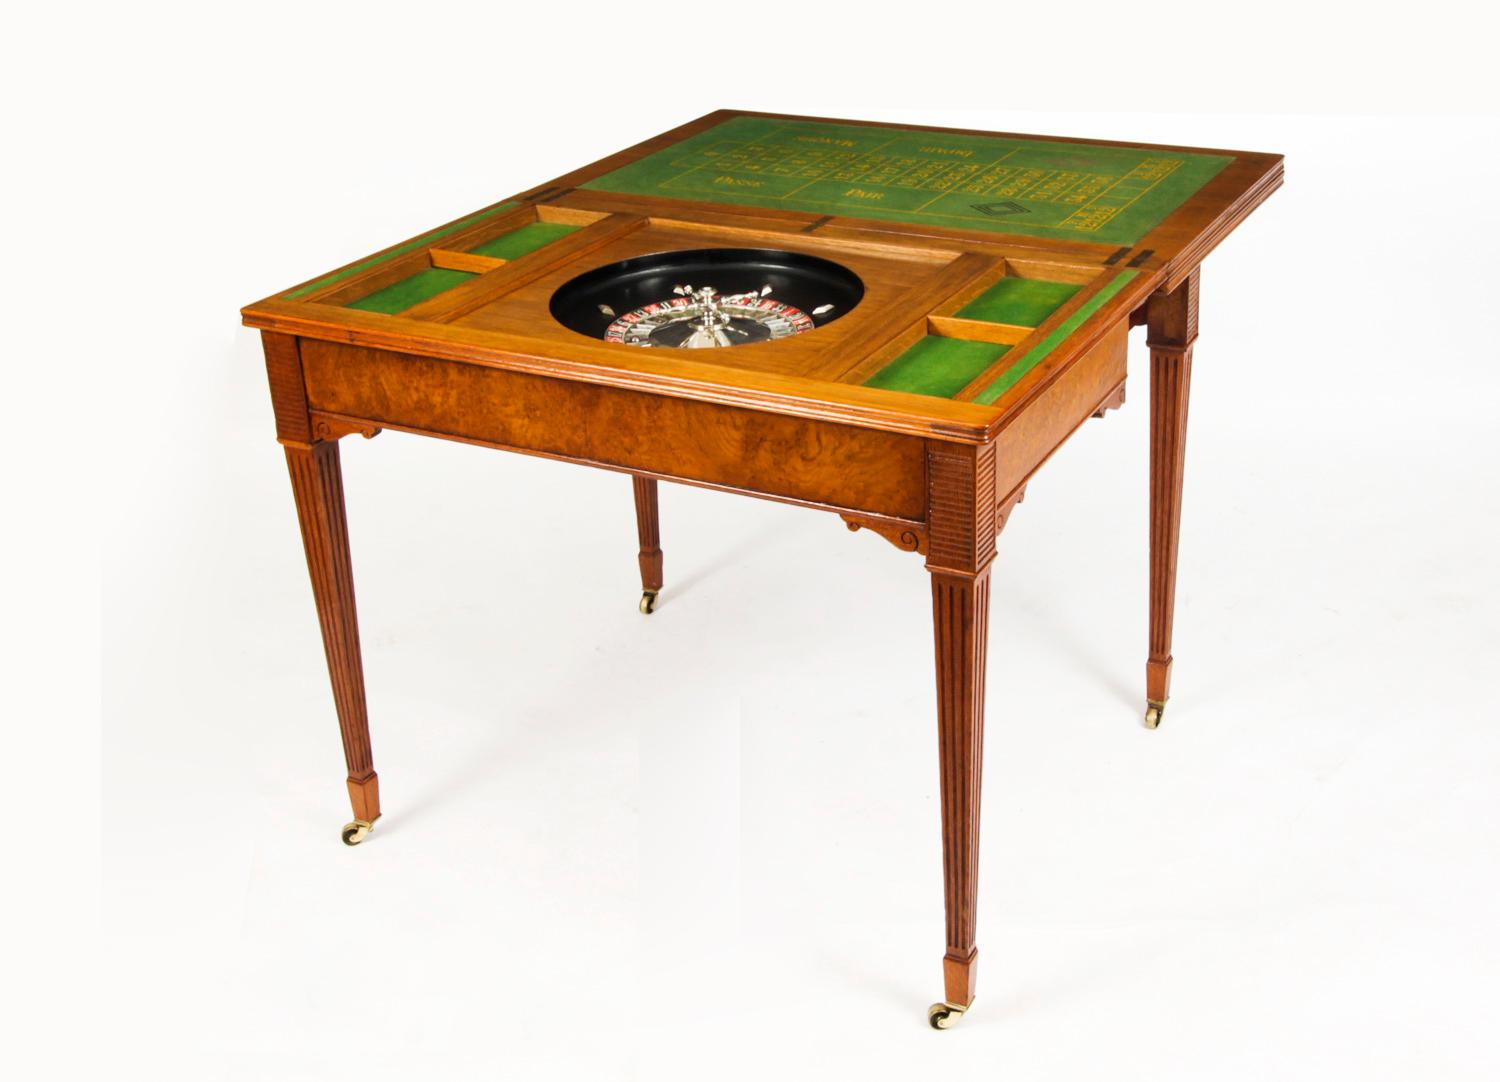 This is a fabulous high quality antique English Victorian pollard oak and boxwood inlaid metamorphic triple top games table for cards and roulette, circa 1870 in date.
 
The hinged triple top opens to reveal the green baize lined gaming interior